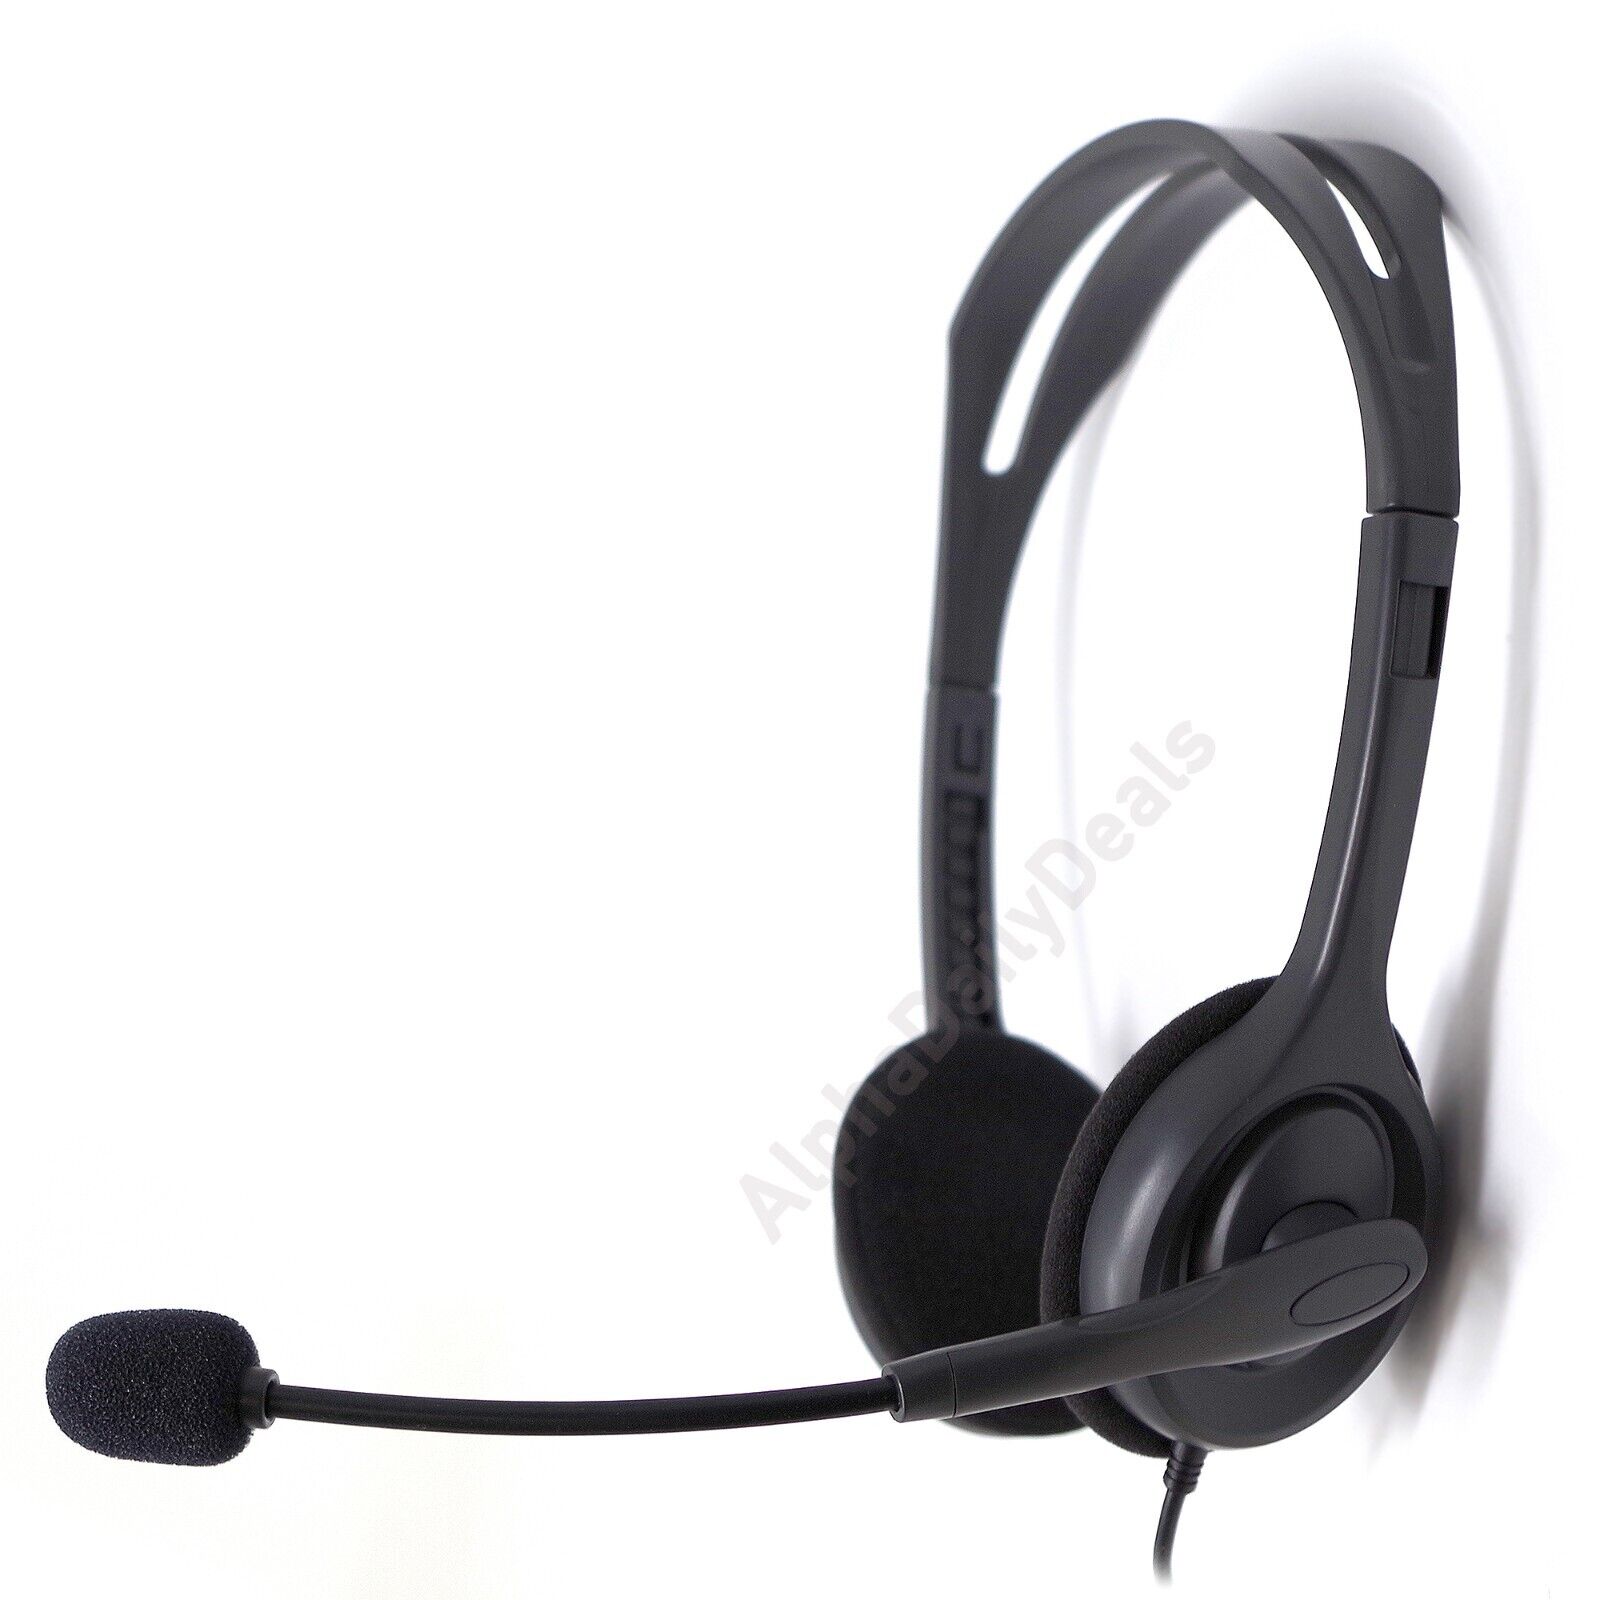 Logitech H111 Wired Stereo Headset with Microphone 3.5mm Jack PC Mac Laptop